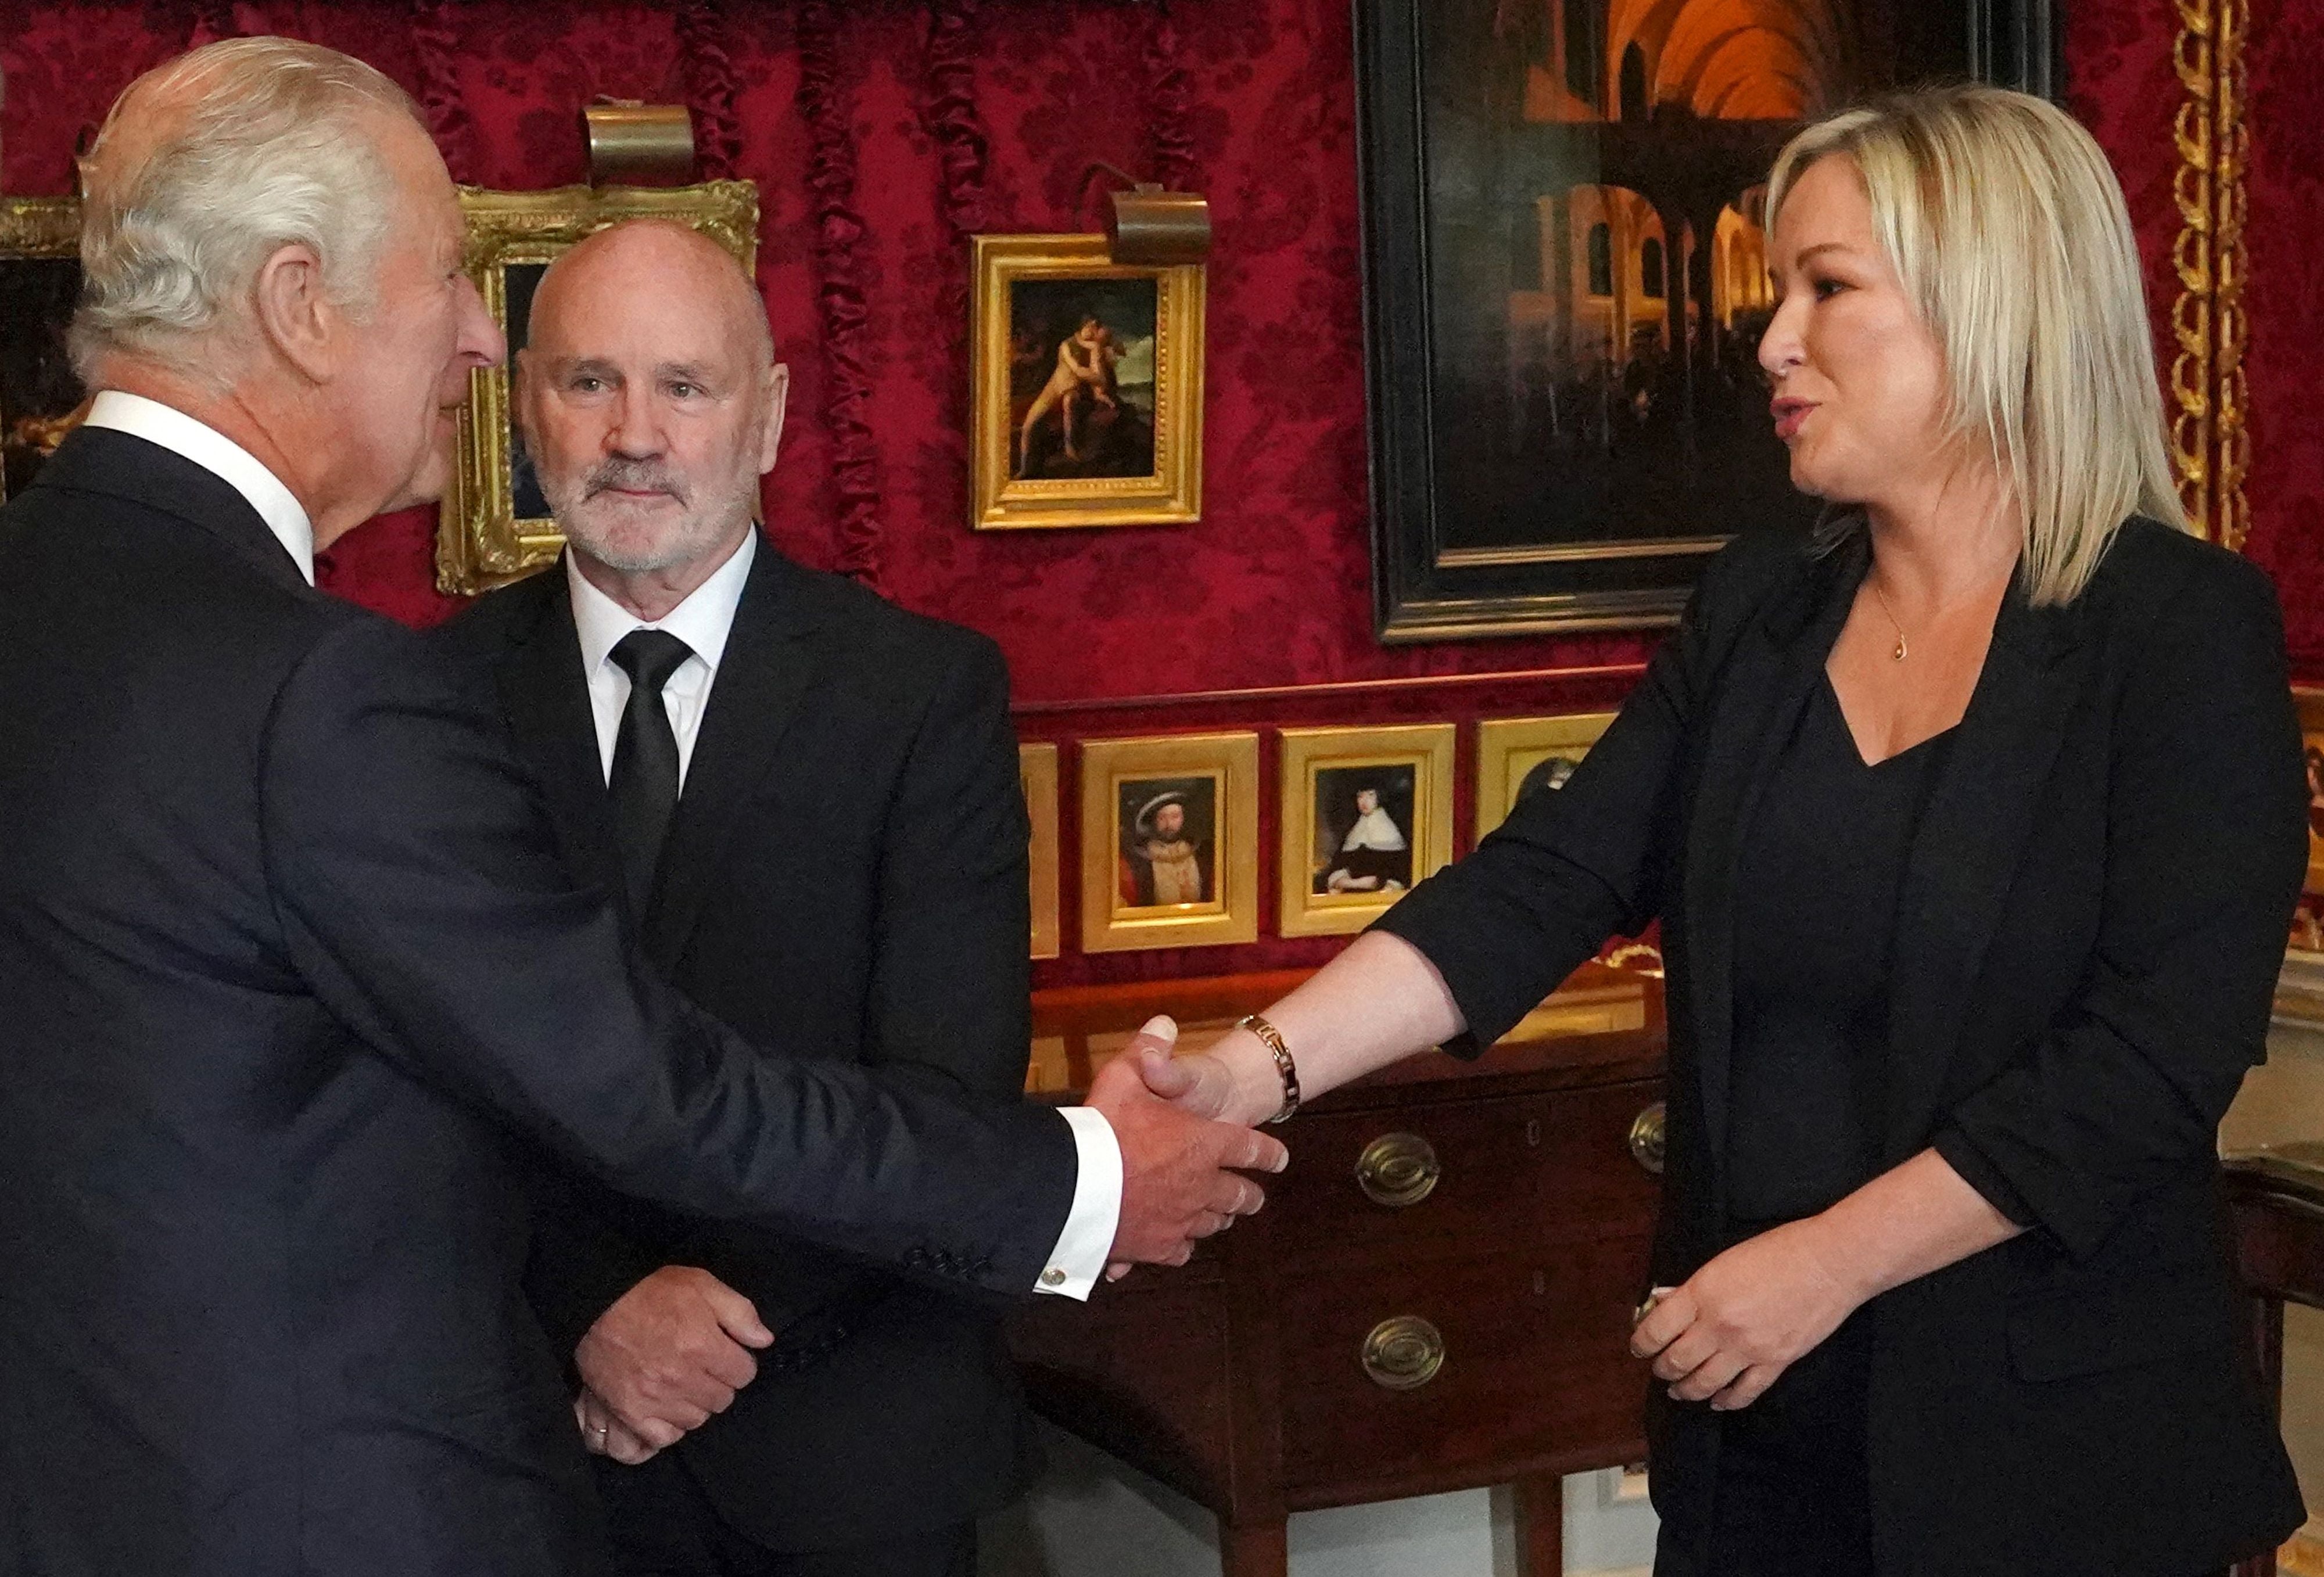 Stormont speaker Alex Maskey, who was interned by British authorities during the Troubles, looks on as King Charles meets Sinn Fein leader Michelle O’Neill in Belfast on Tuesday.